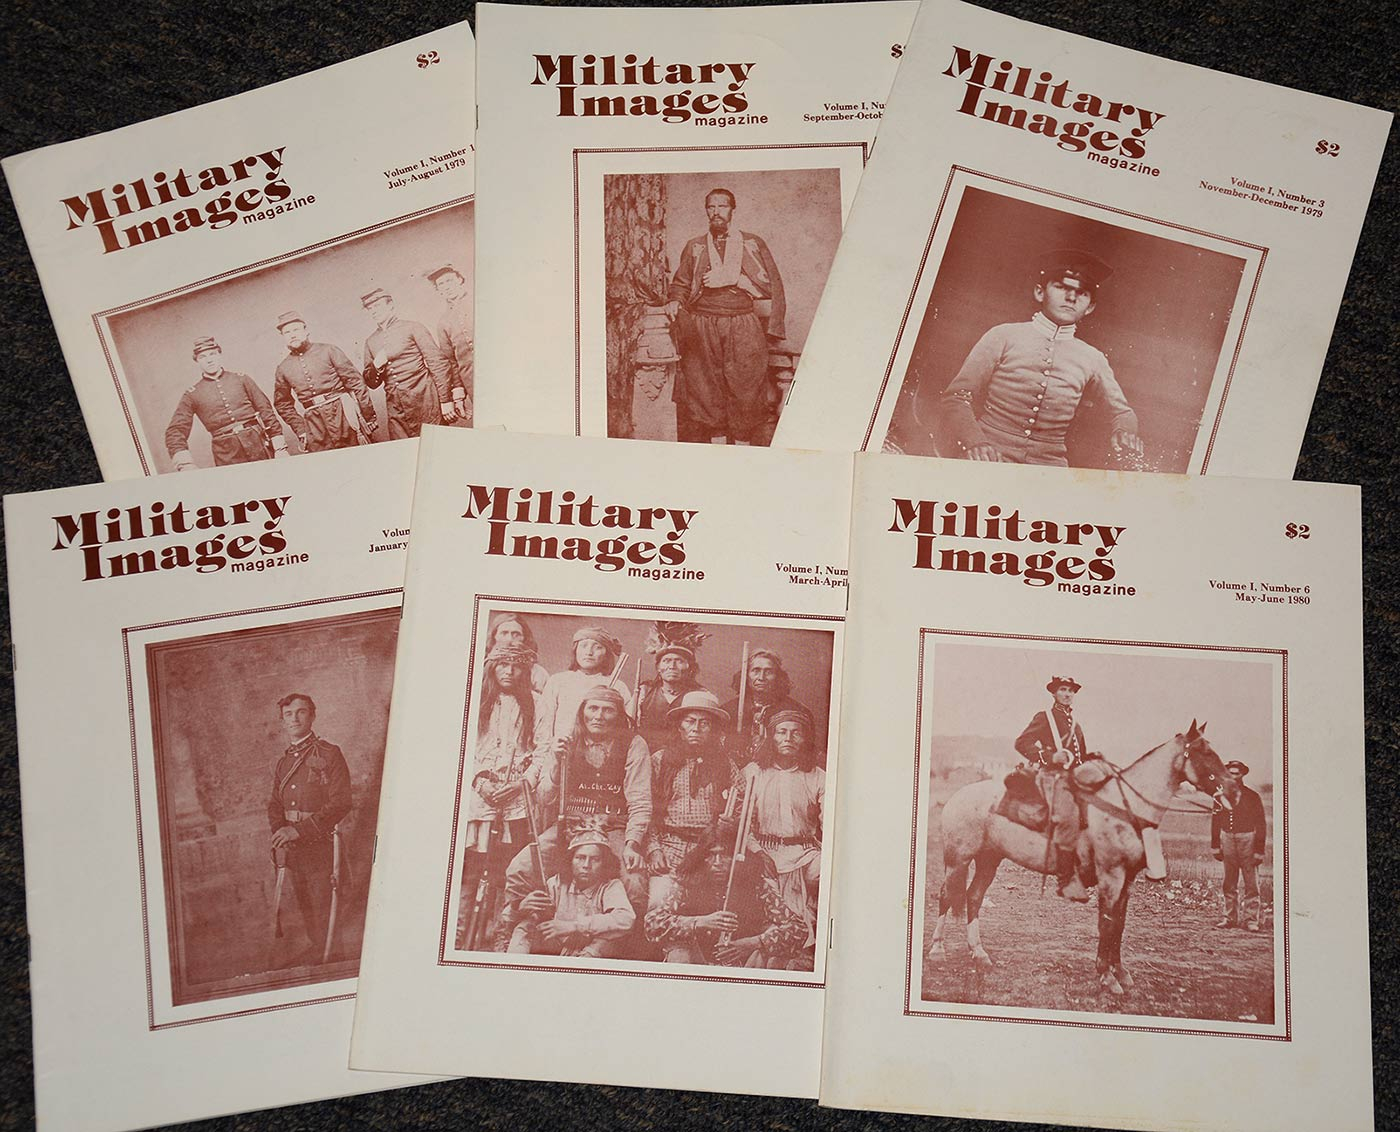 LOT OF EARLY ISSUES OF MILITARY IMAGES MAGAZINE